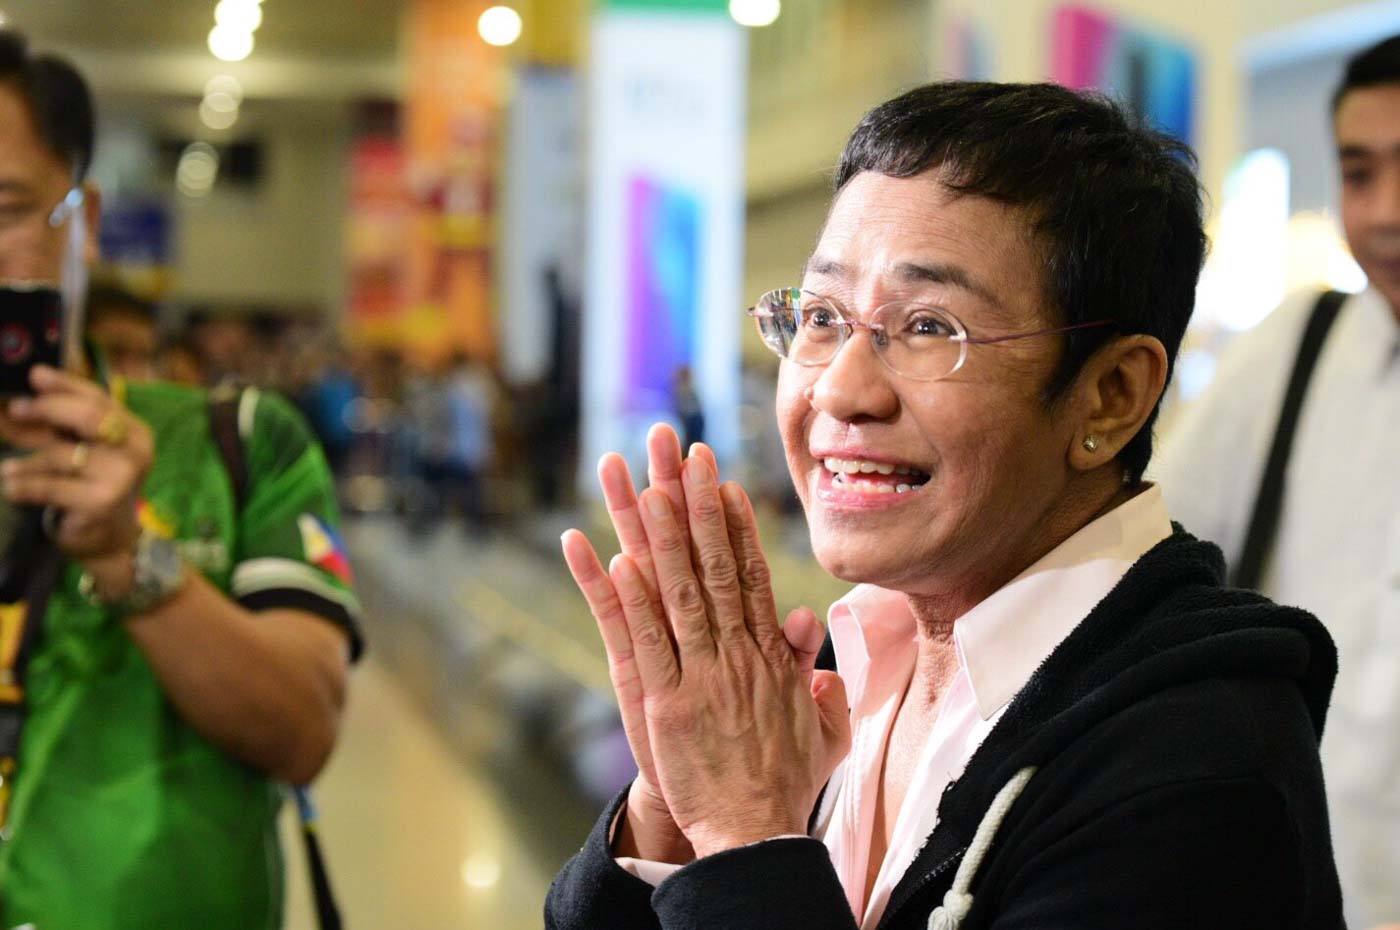 TAXES. The Bureau of Internal Revenue includes Rappler among the top withholding agents, amid the tax cases hurled against it. In the photo is Rappler CEO Maria Ressa speaking to media on December 2, 2018. Photo by LeAnne Jazul/Rappler 